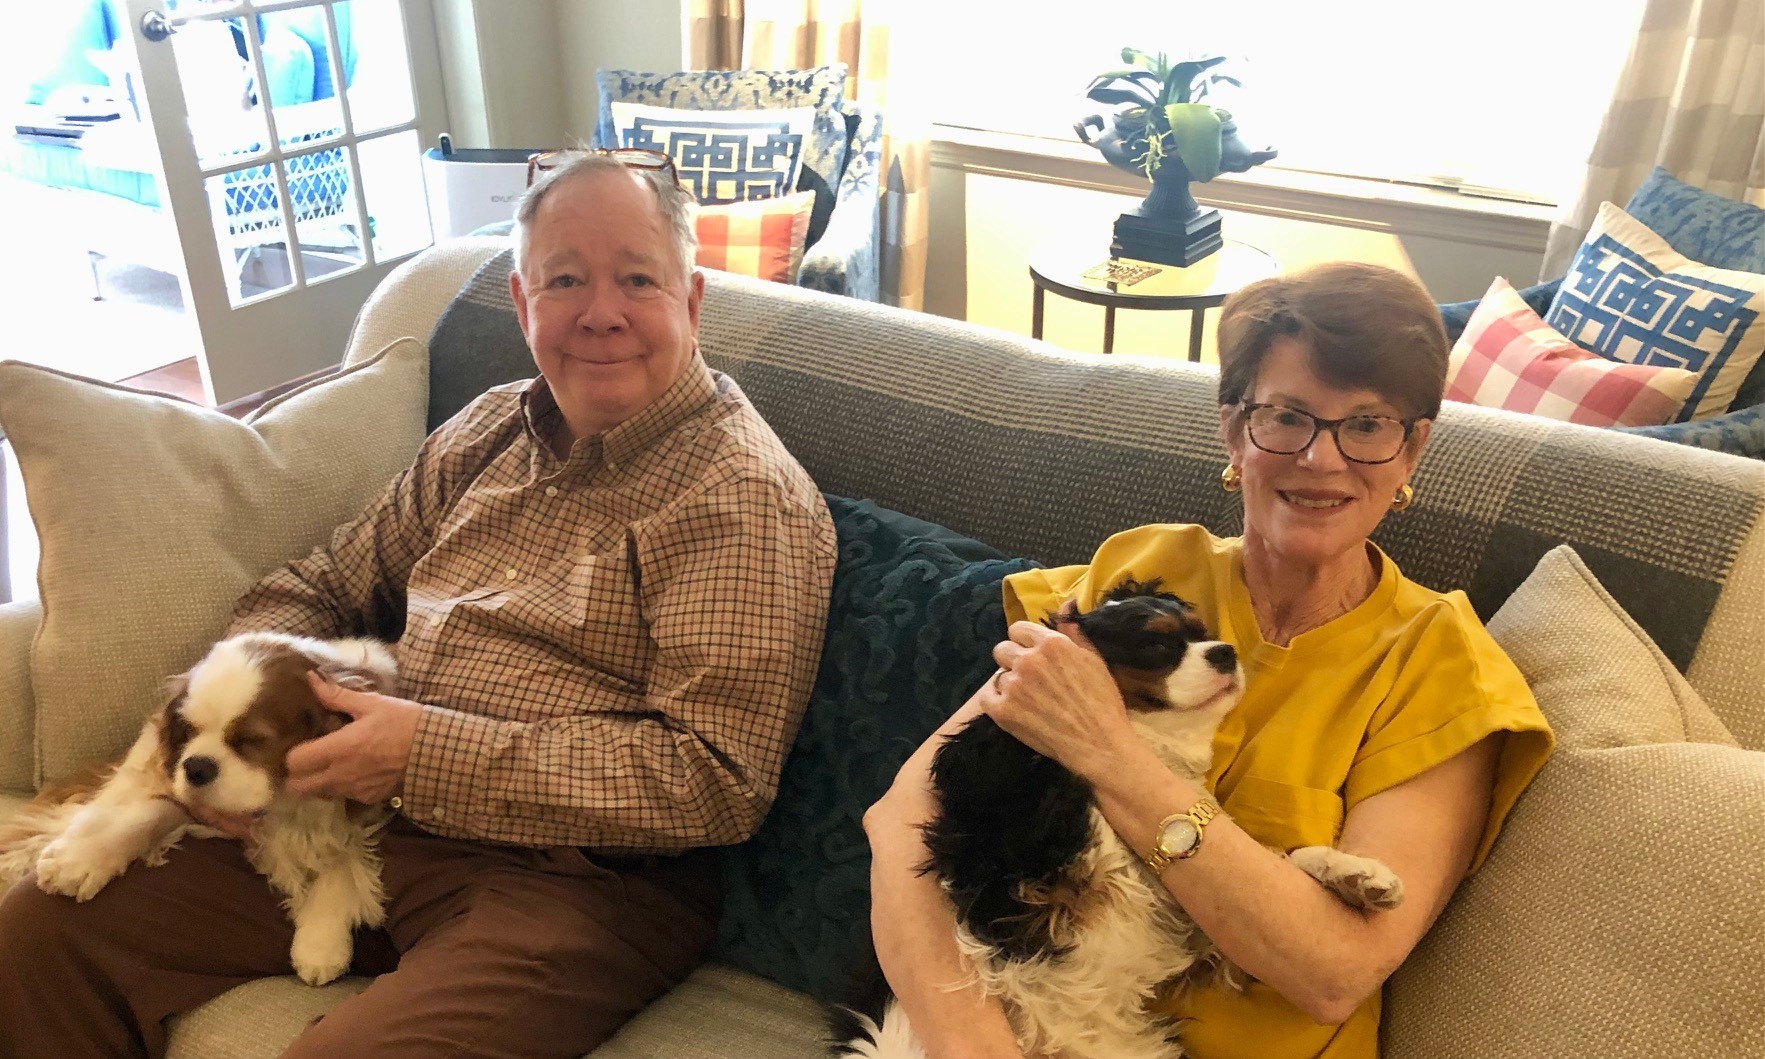 couple with dogs on couch